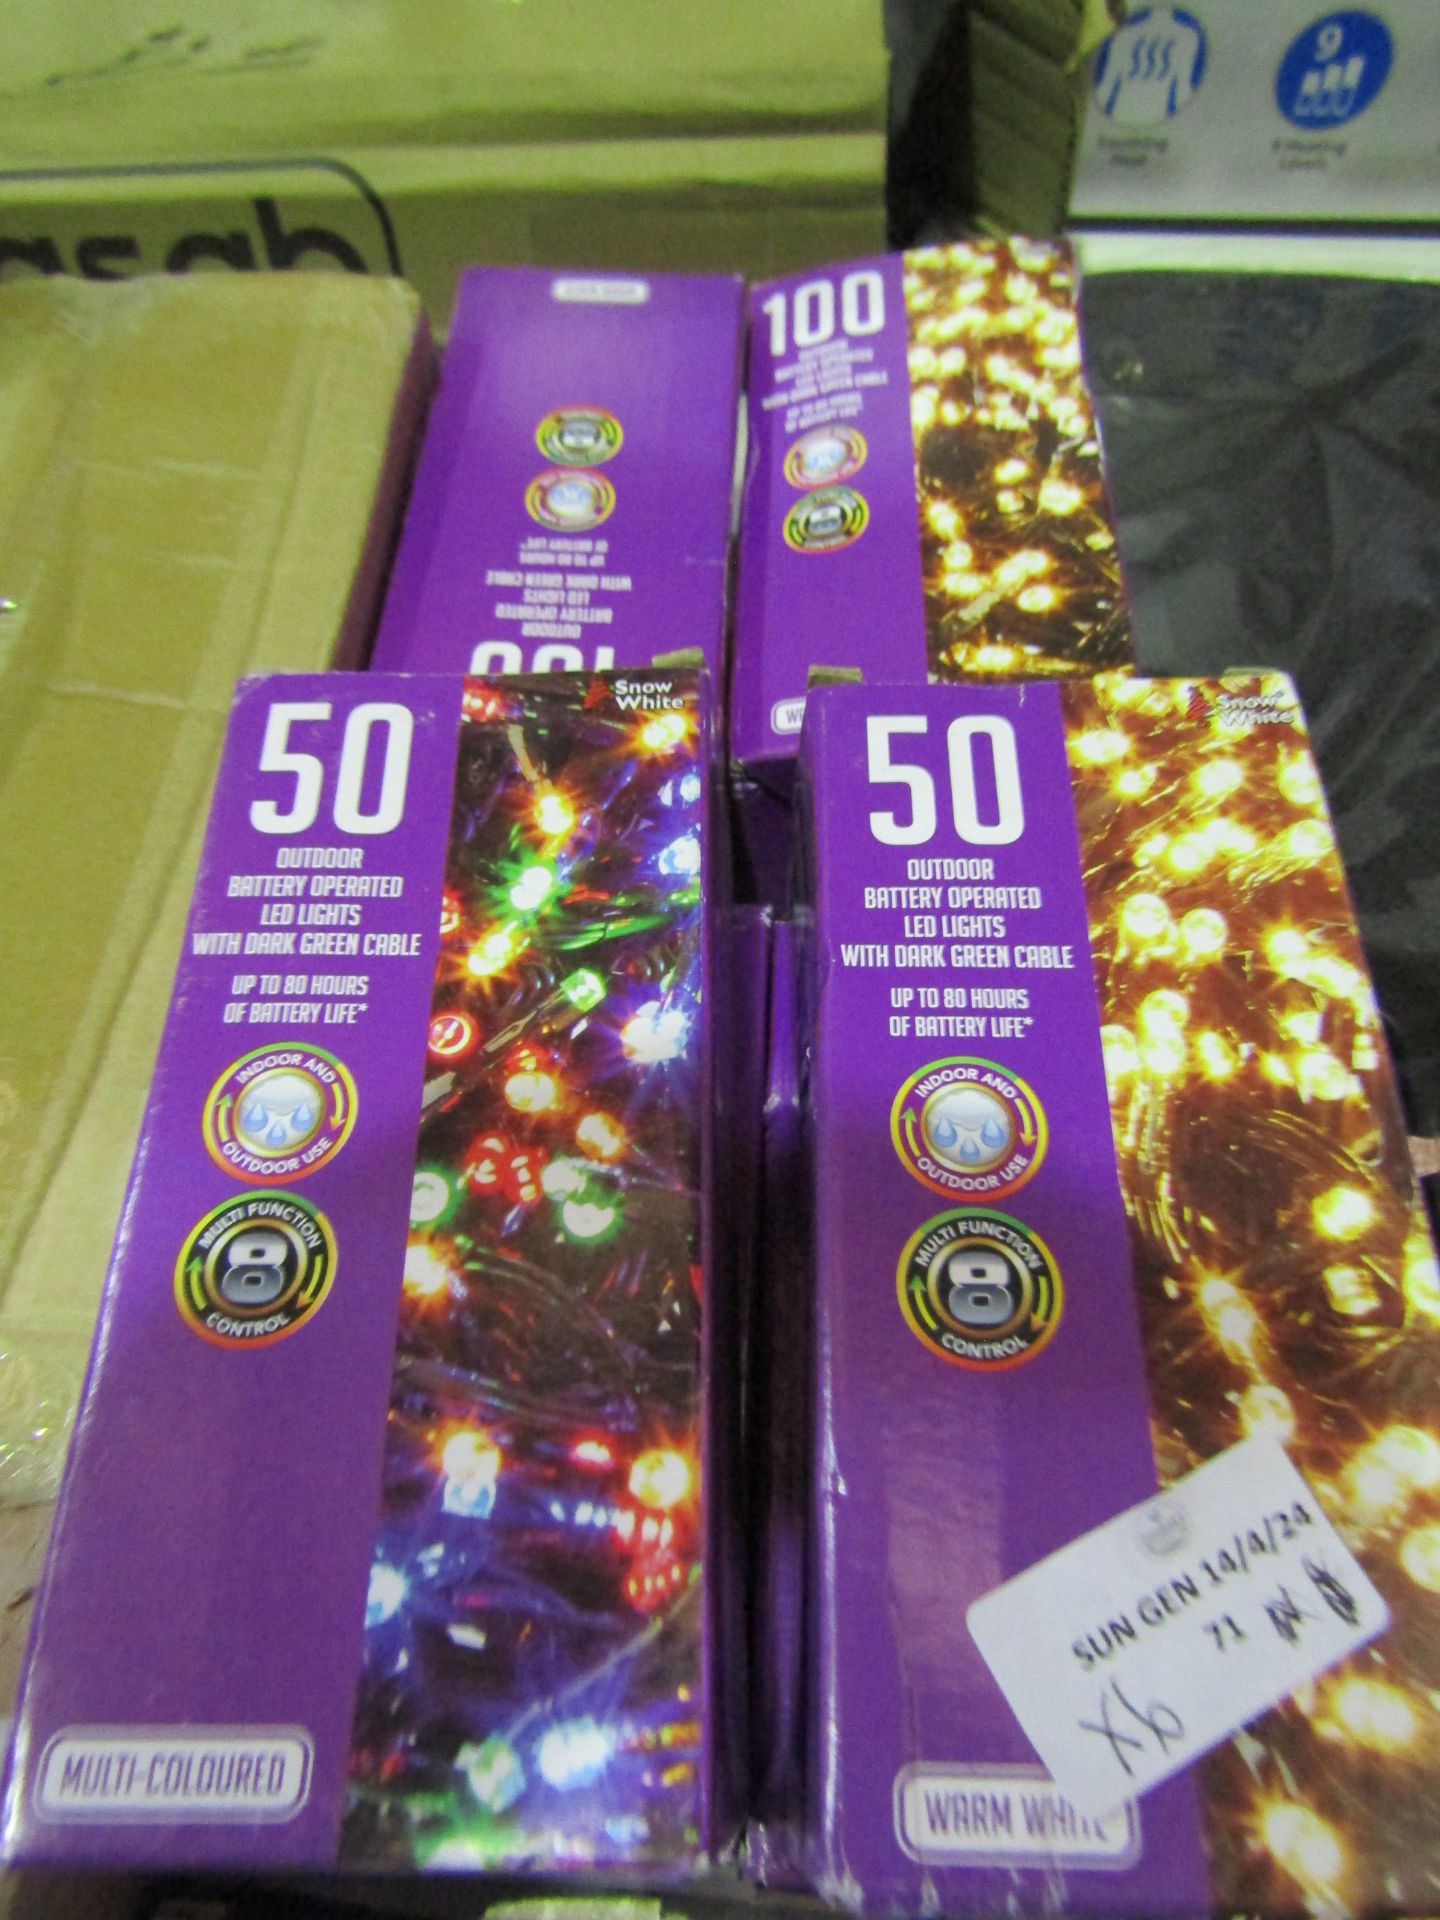 6x Items Being 4x Multi-Coloured 50 Outdoor Battery Operated LED Lights - 2x Warm White 100